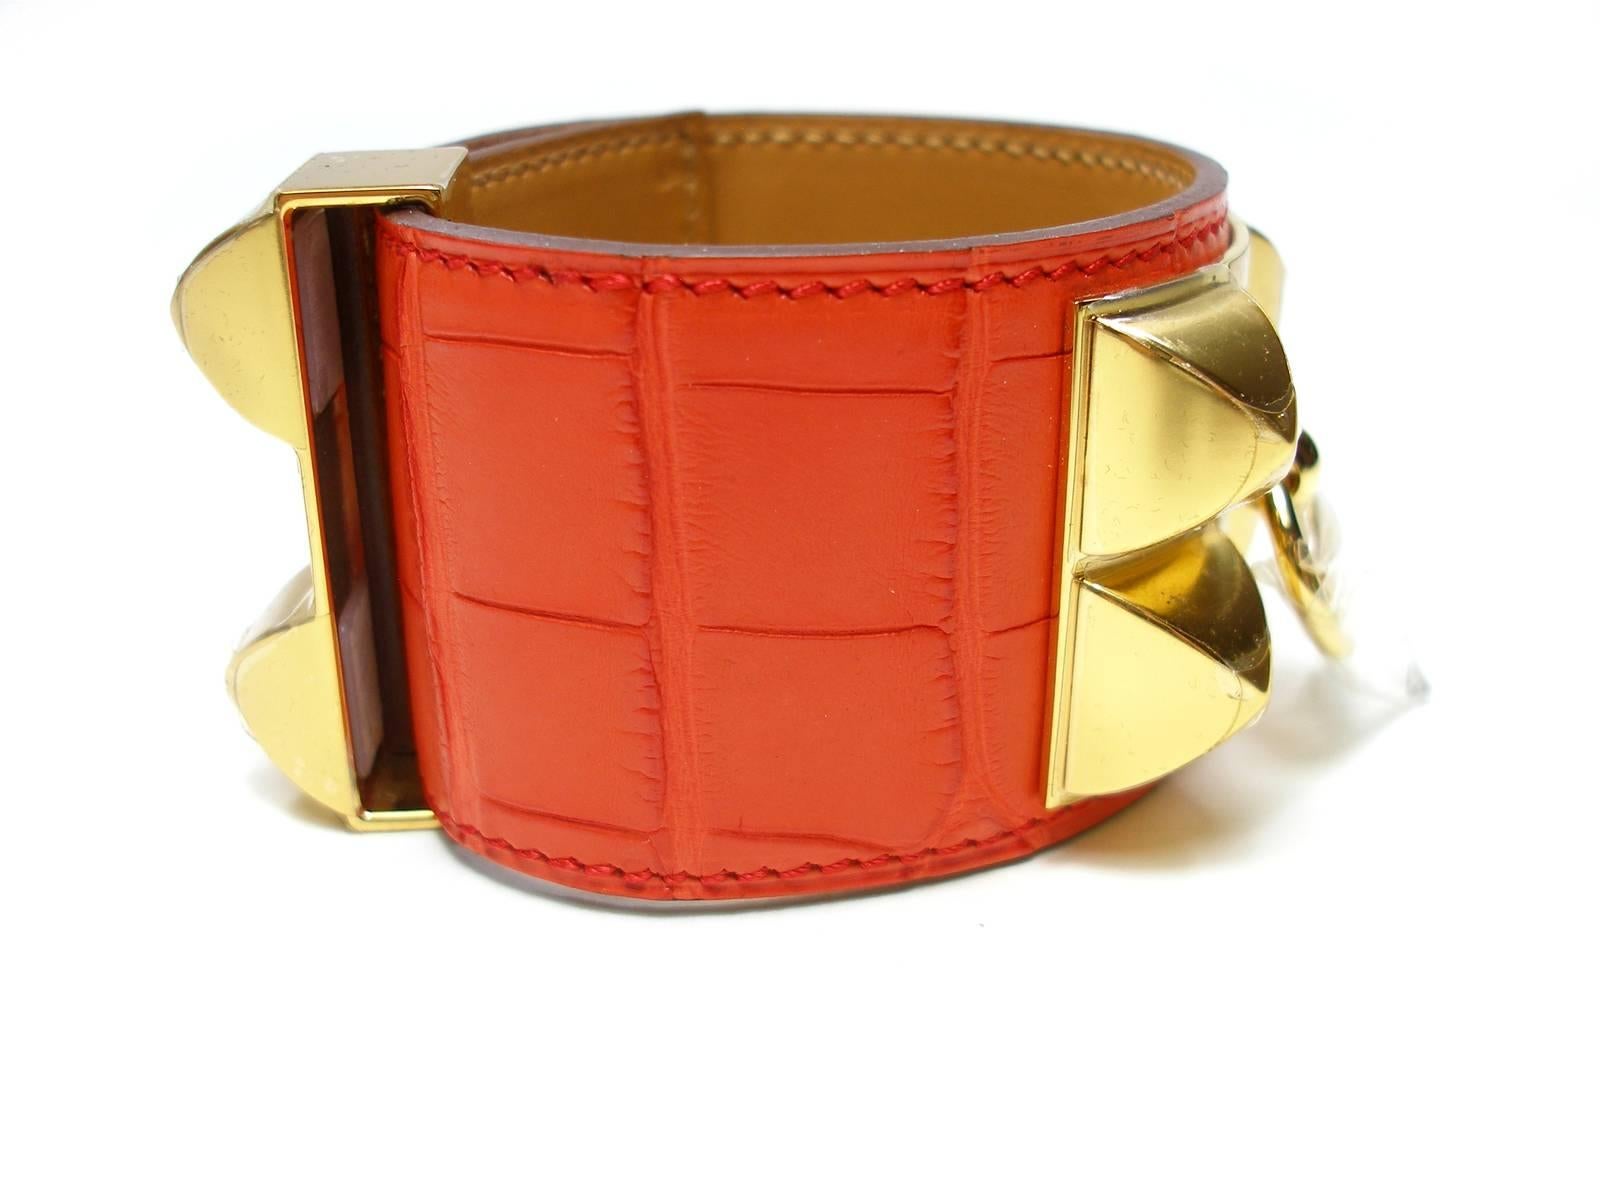 Hermès CDC Alligator mat 
Color Orange Poppy
Gold HDW
Adjustable
4 possibilités 16 cm à 19 cm or 6.29 to 7.48 inches 
Width : 4 cm 
Year X - Production 2016 
Plastic is still on gold plated hardware
Please note for this purchase : this bracelet